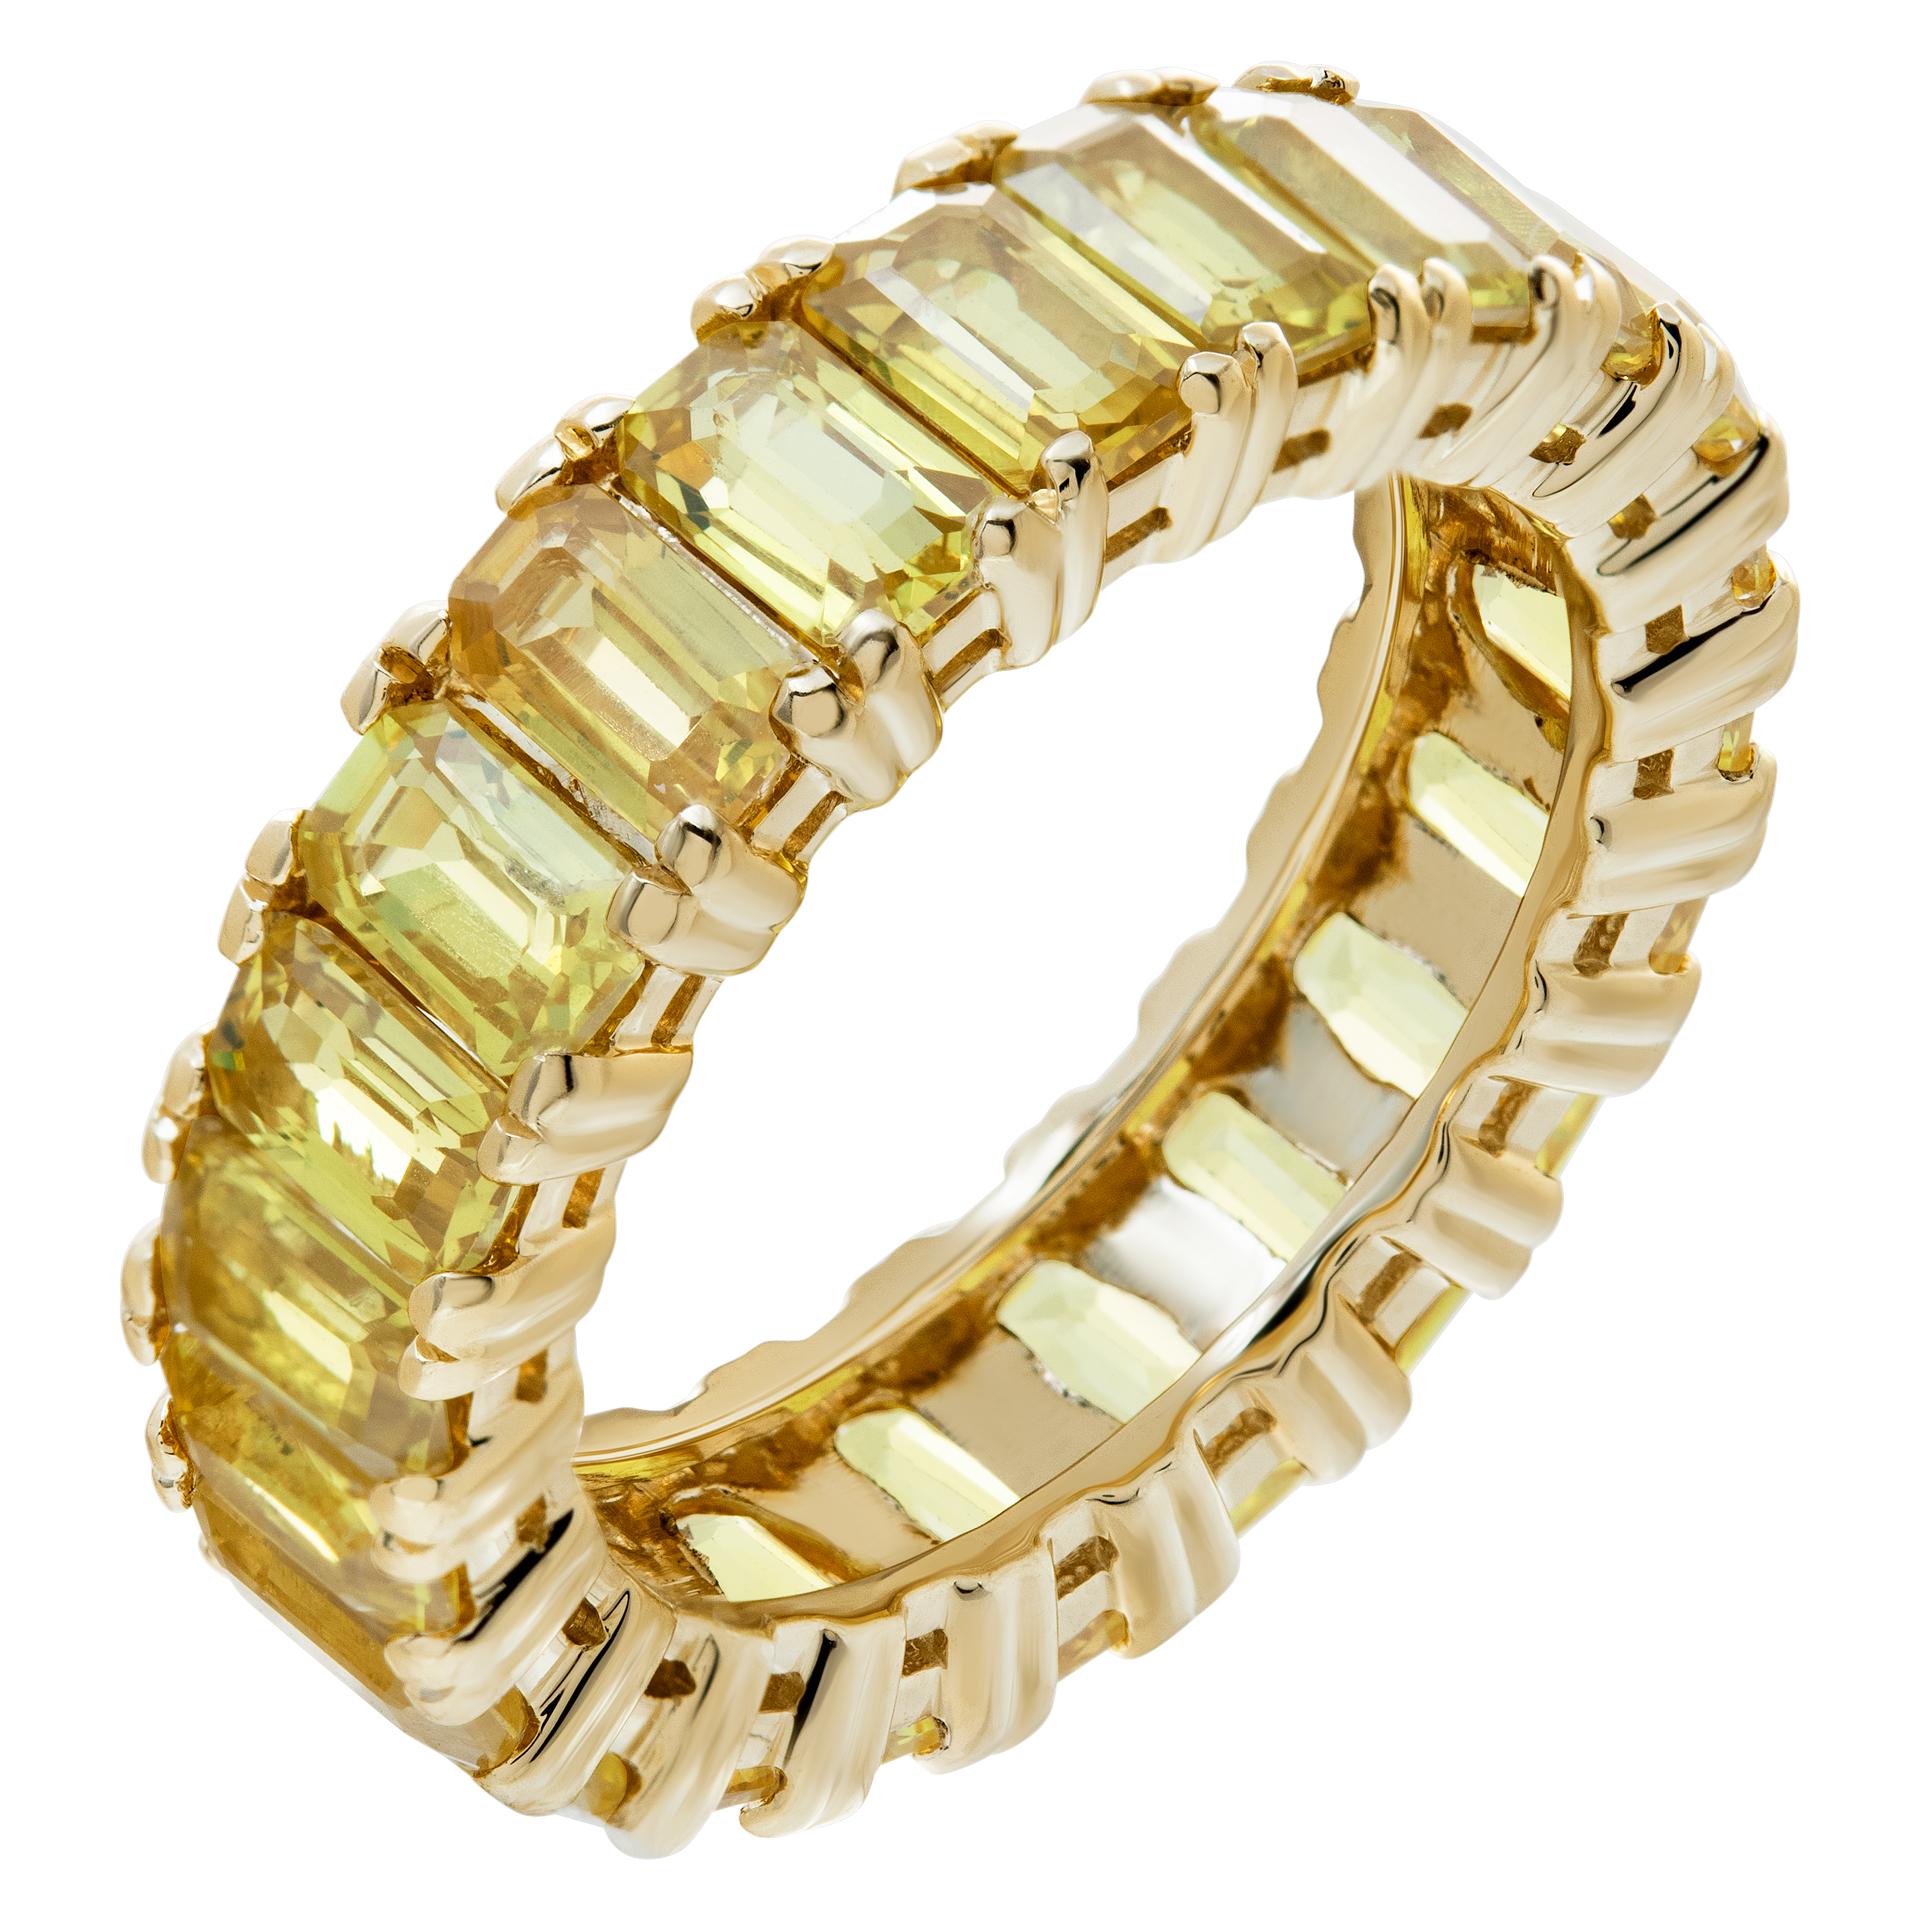 Yellow gold yellow sapphire eternity band In Excellent Condition For Sale In Surfside, FL